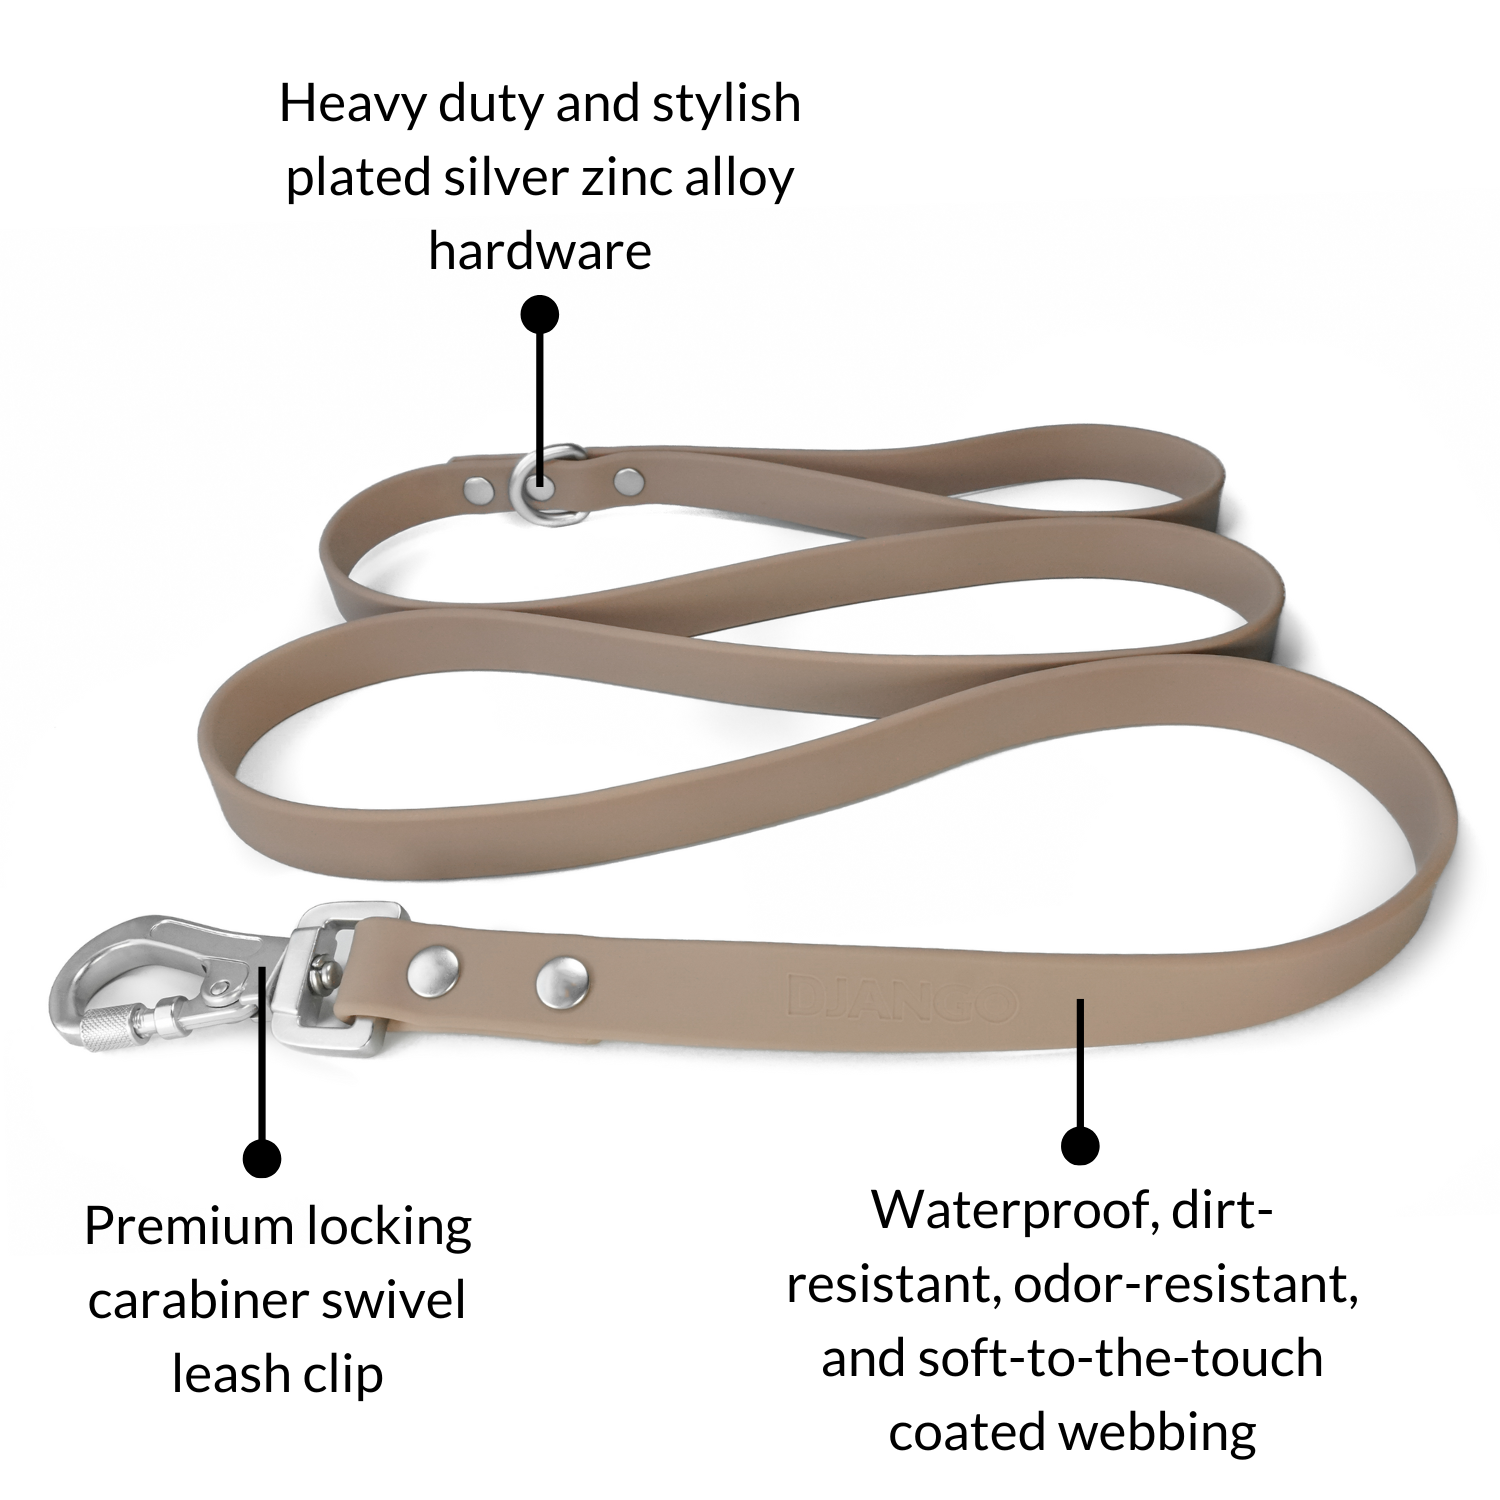 DJANGO Tahoe Dog Leash in Sandy Beige - The waterproof dog leash features heavy duty and stylish plated silver hardware and a premium locking carabiner leash clip for extra security - djangobrand.com